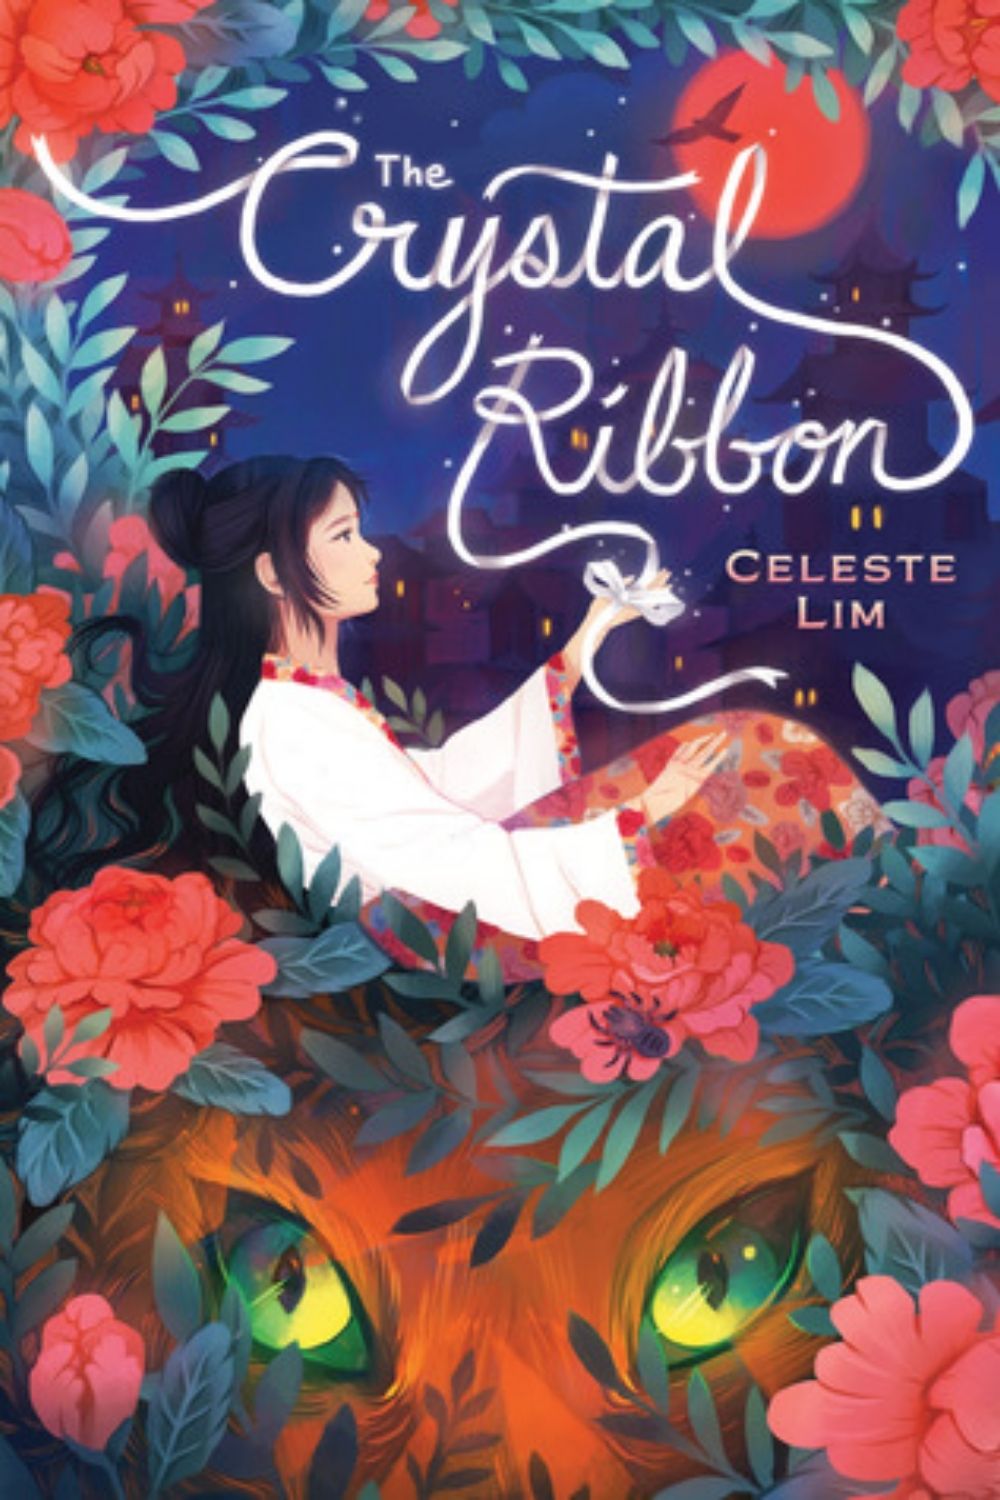 Chinese Culture Inspired Novels (The Crystal Ribbon)